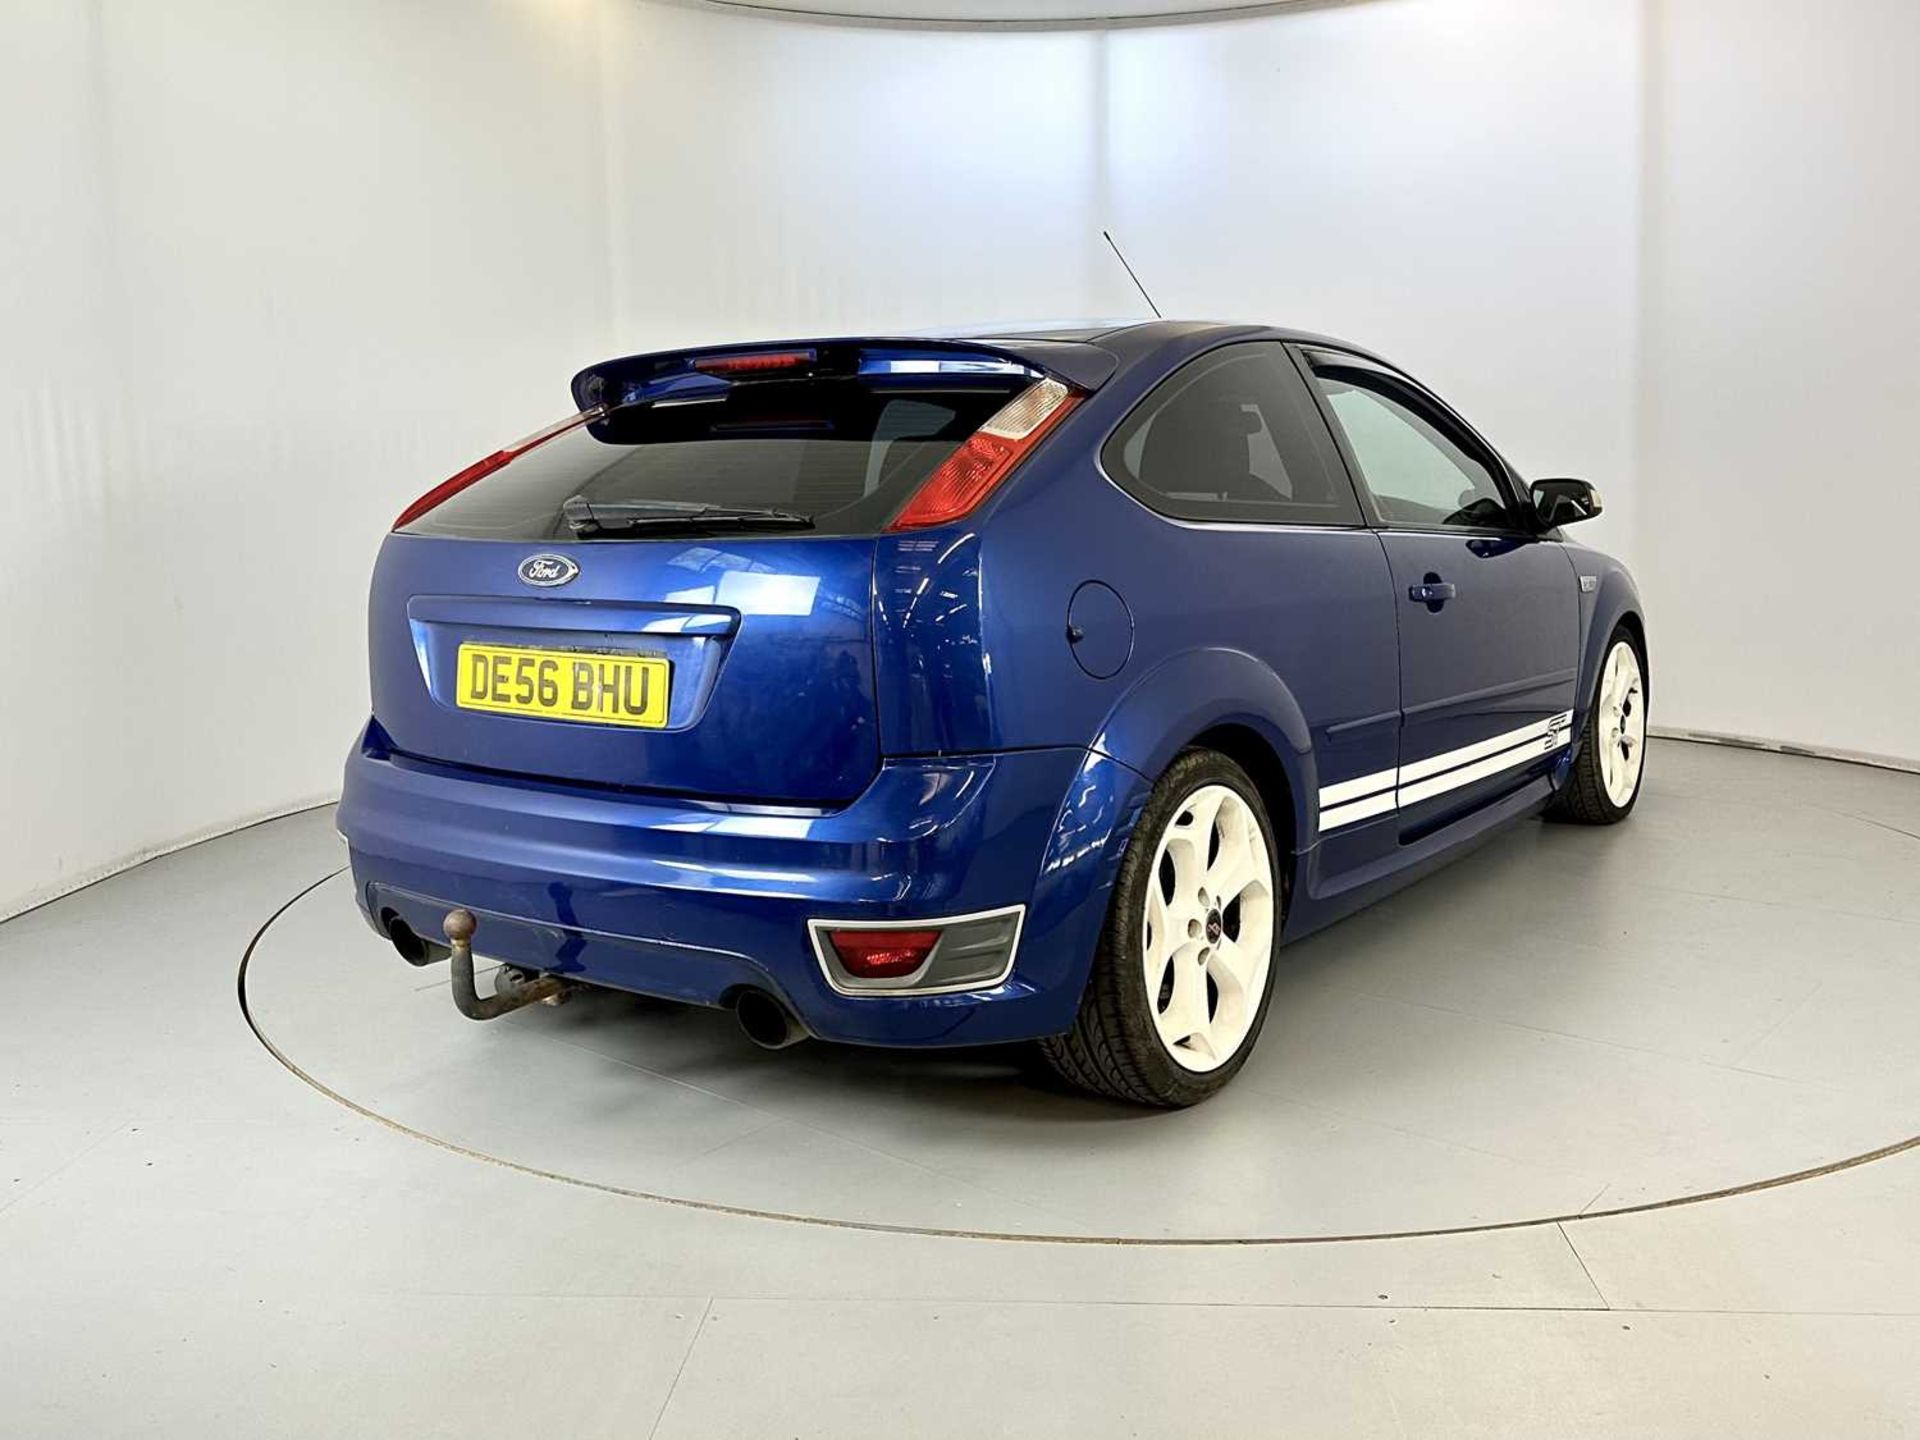 2006 Ford Focus ST - Image 9 of 28